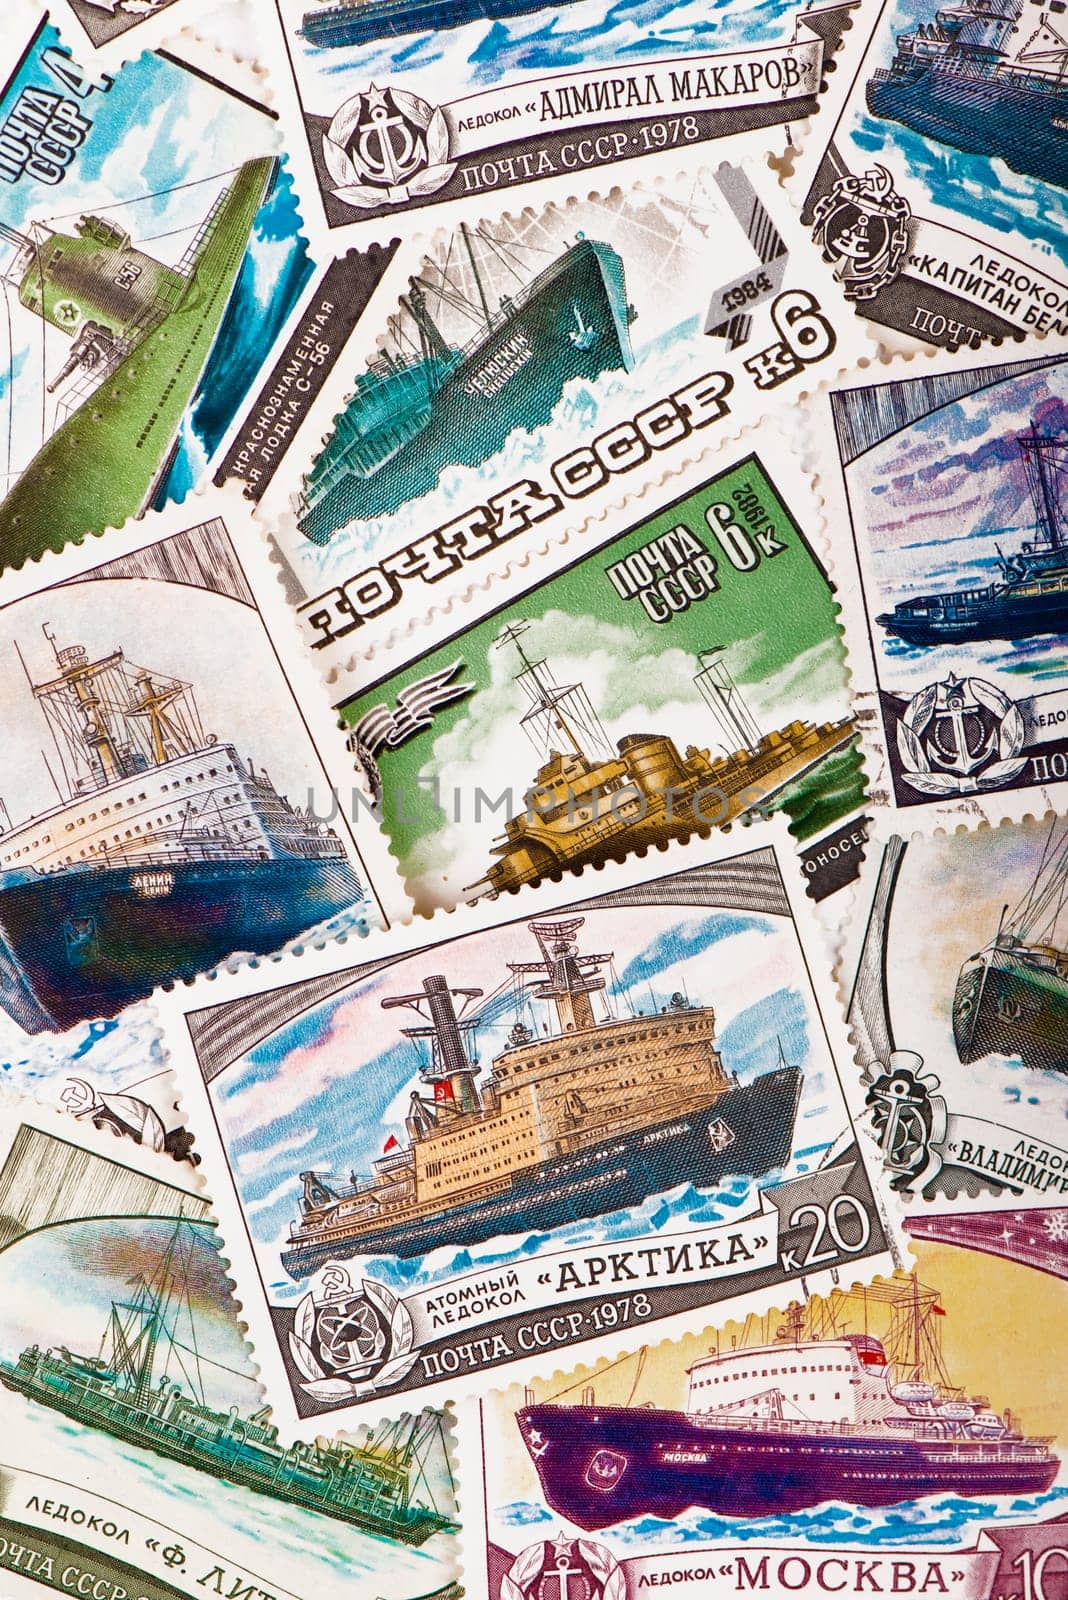 USSR - CIRCA 1978: postage stamp shows Russian icebreakers, circa 1977, approached the nuclear Arctic ice breaker